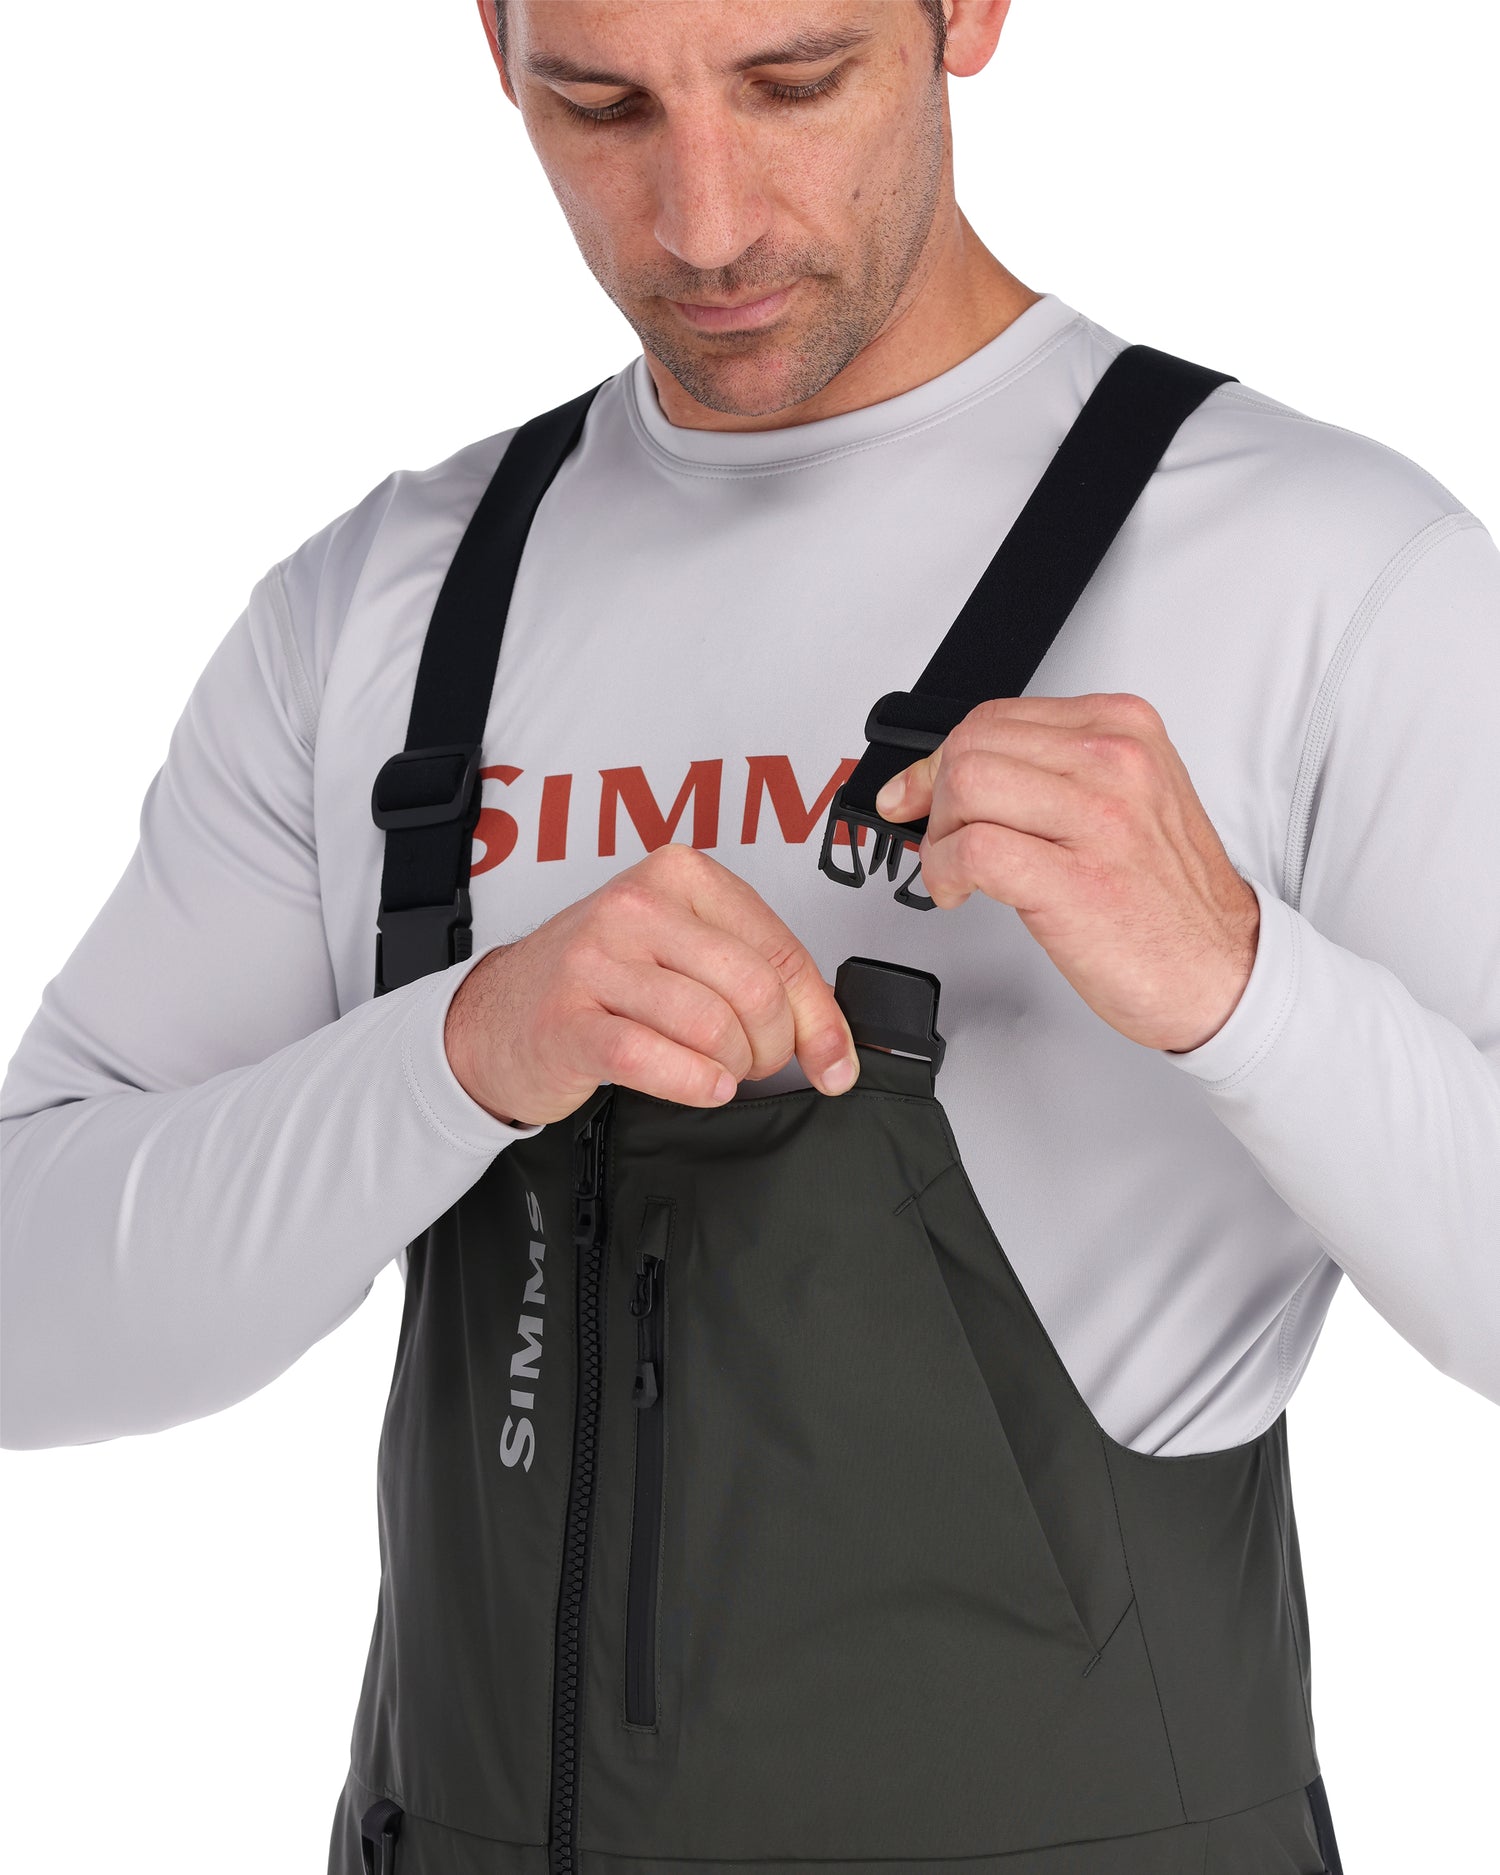 Guide-insulated-bib-carbon-on body